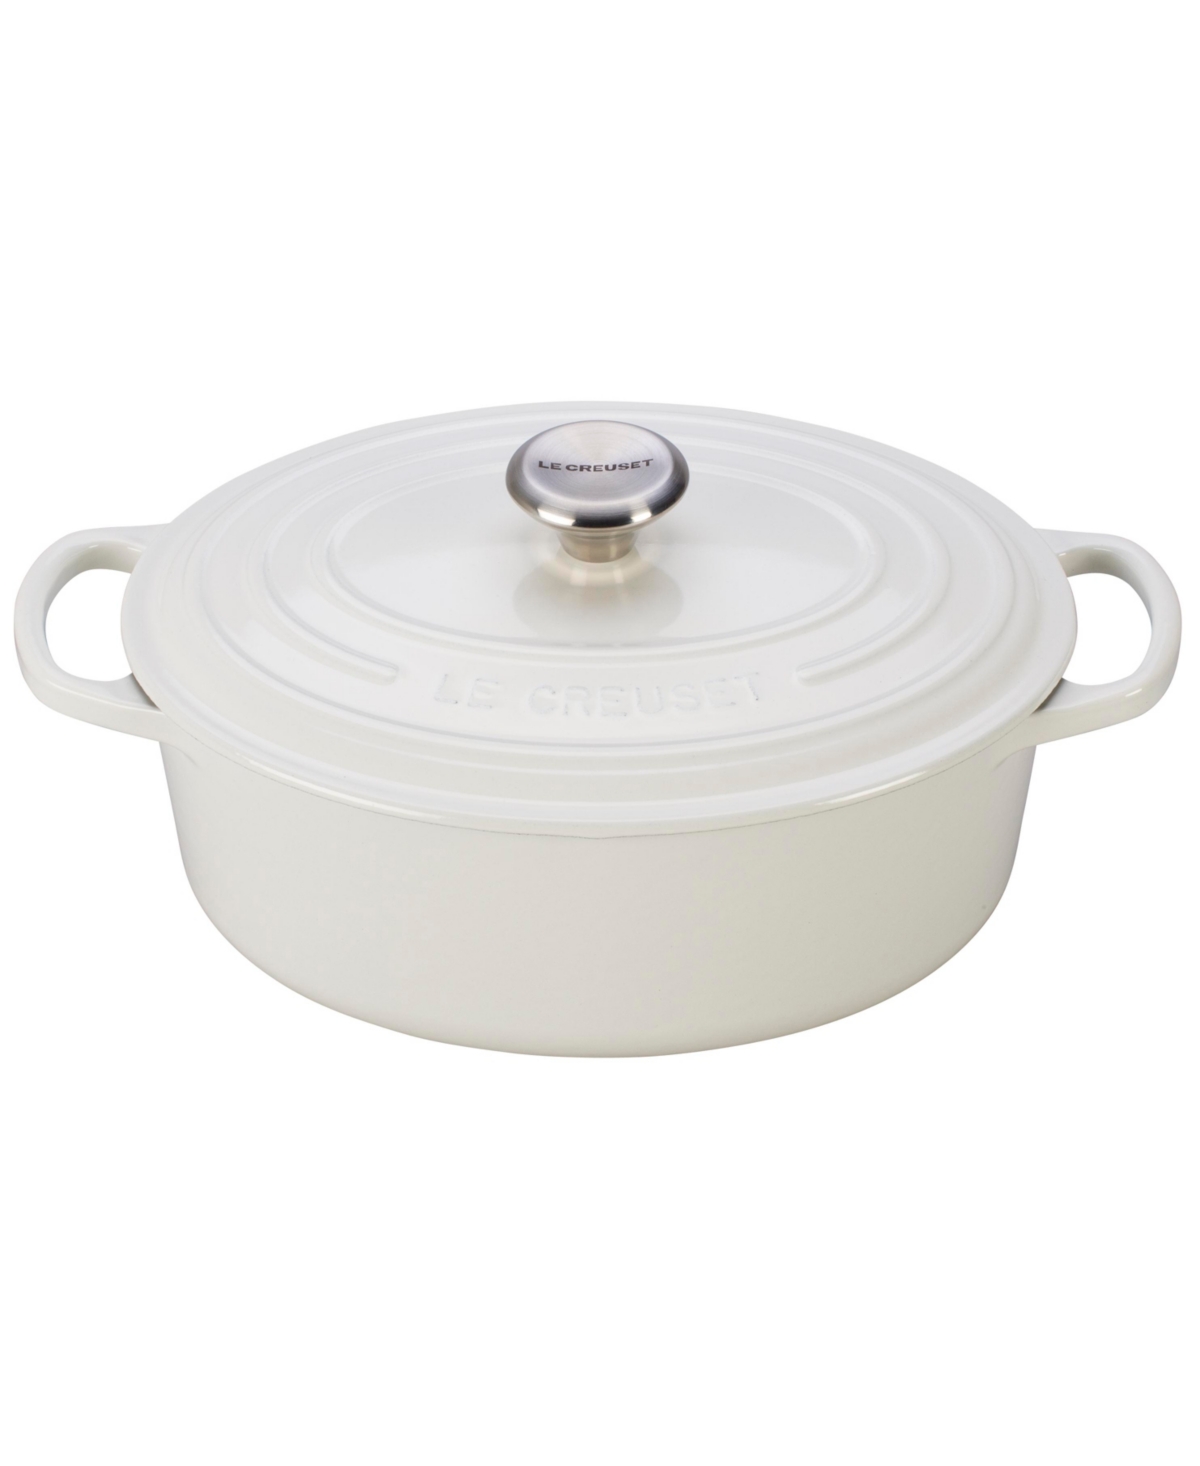 Le Creuset 2.75 Quart Enameled Cast Iron Oval Dutch Oven In White